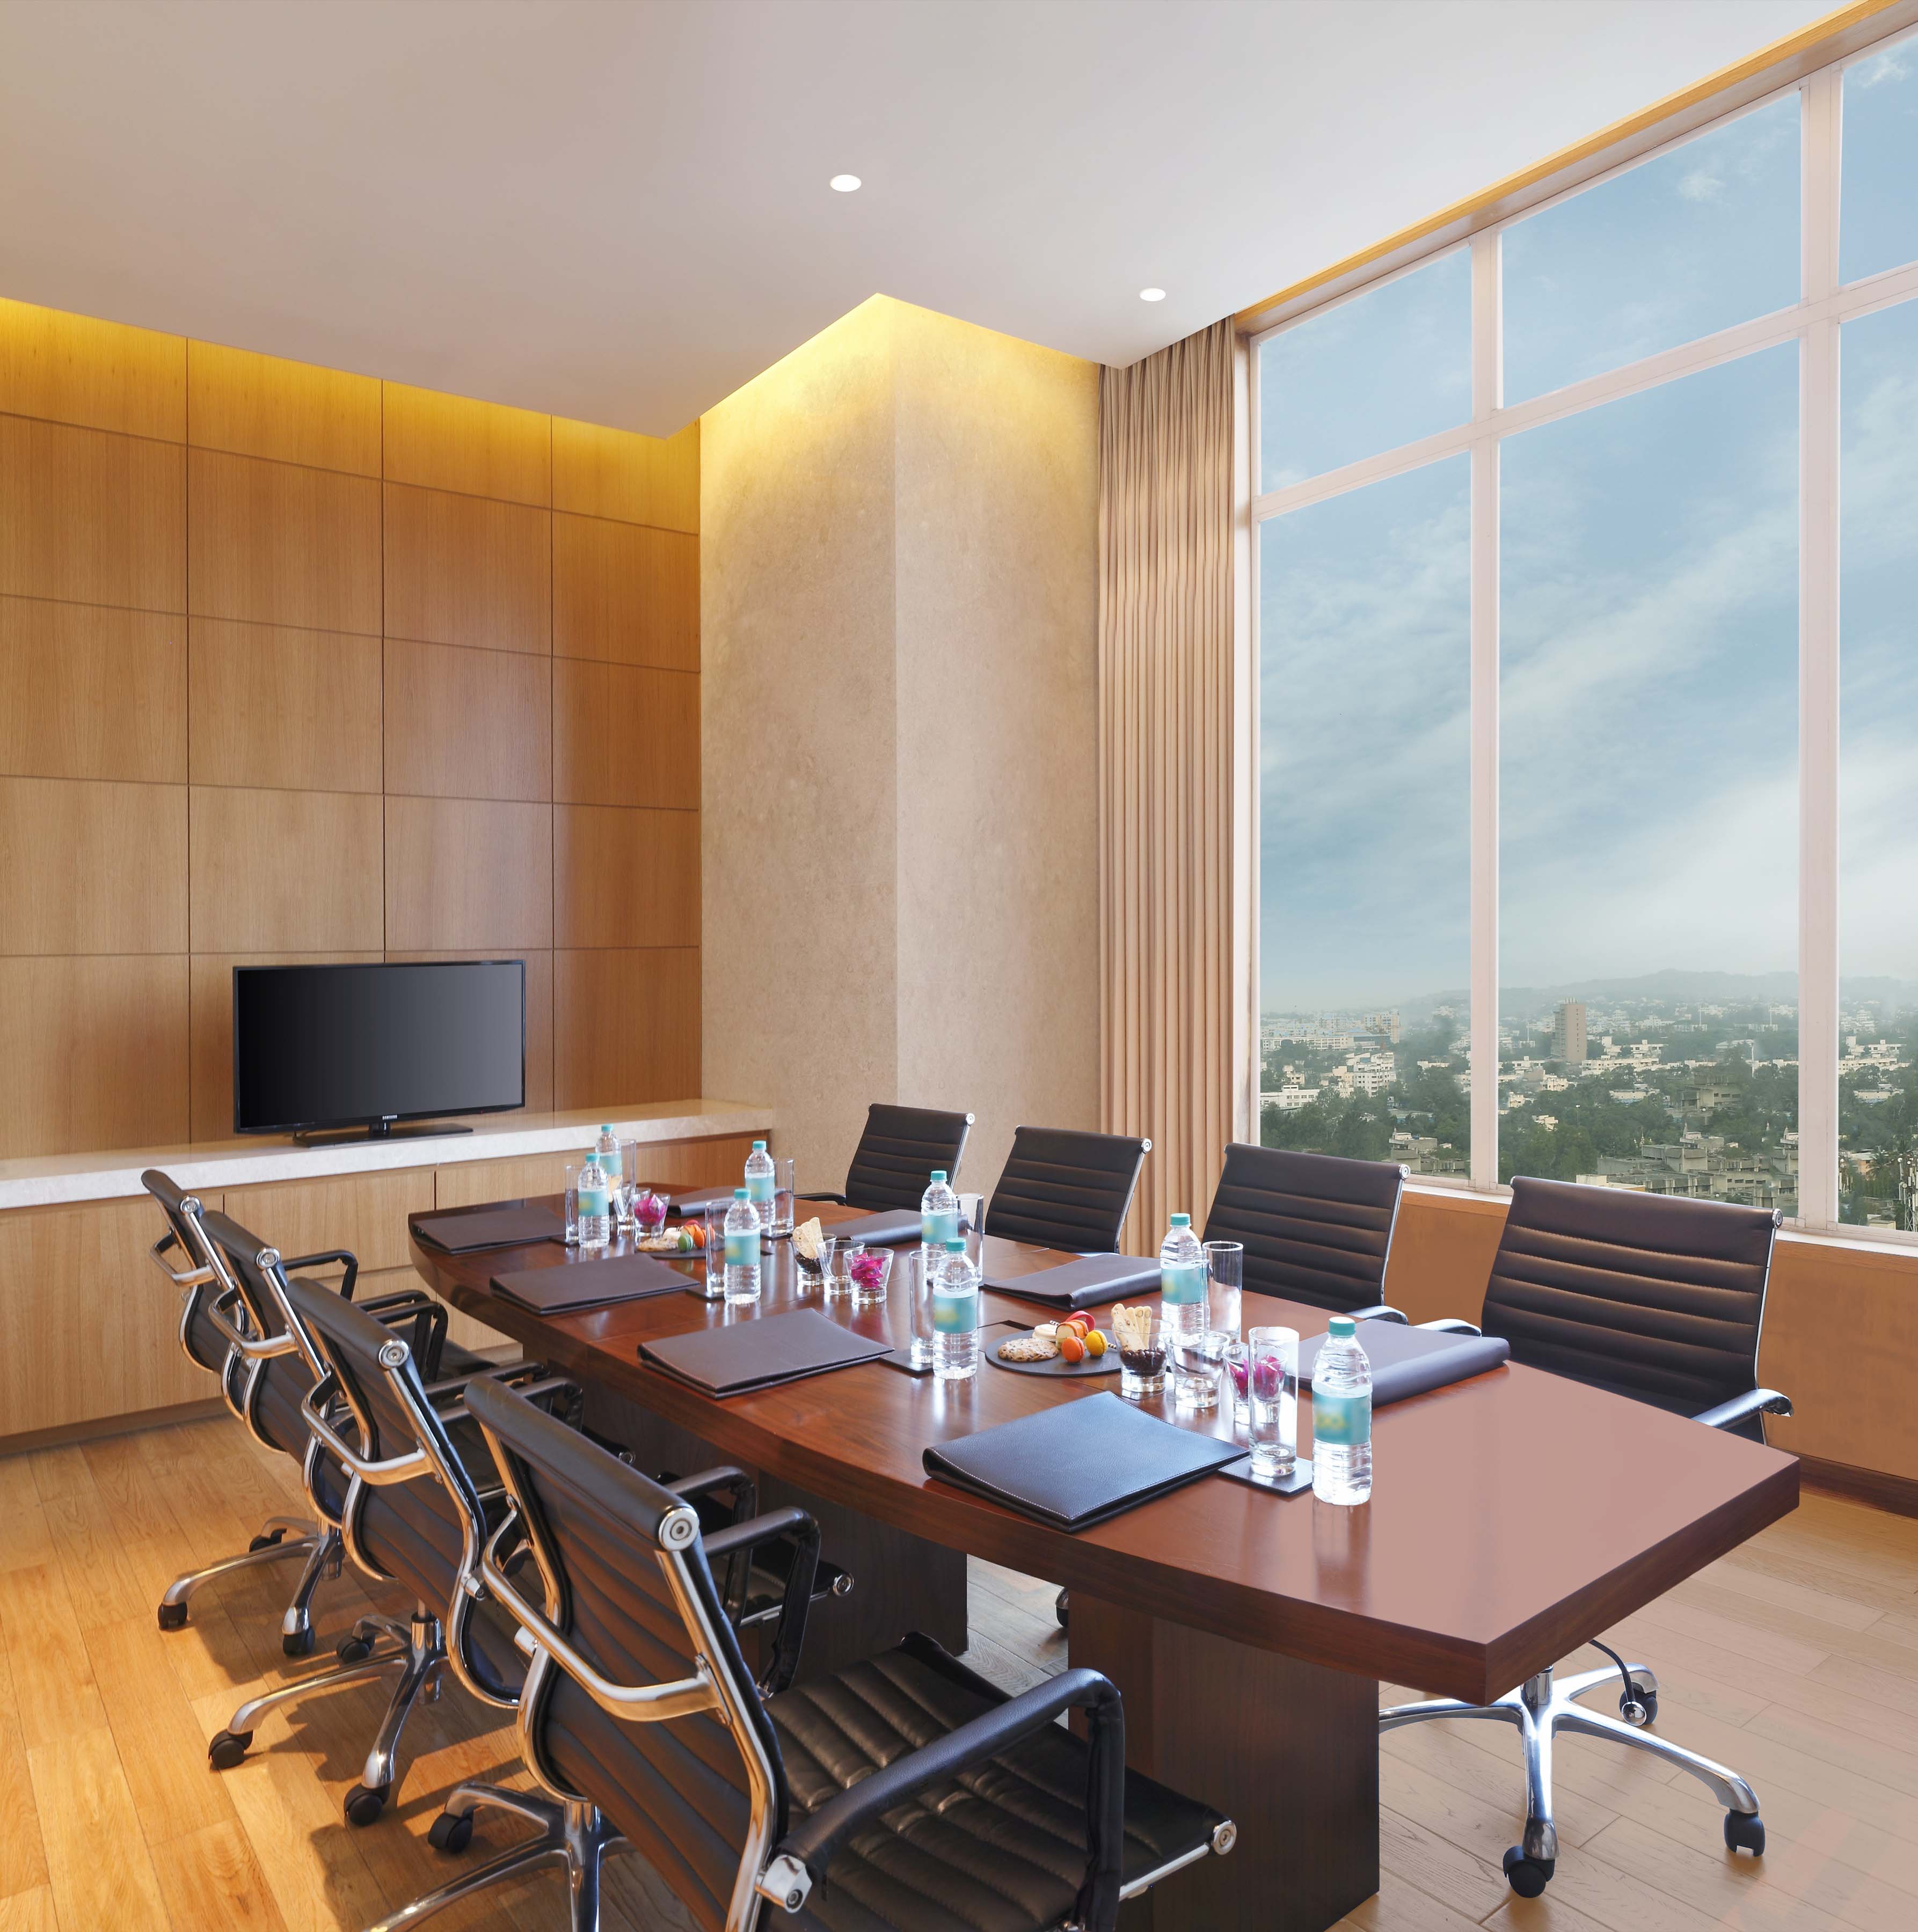 Executive Boardroom with Seating for Eight Guests HDTV and Large Window